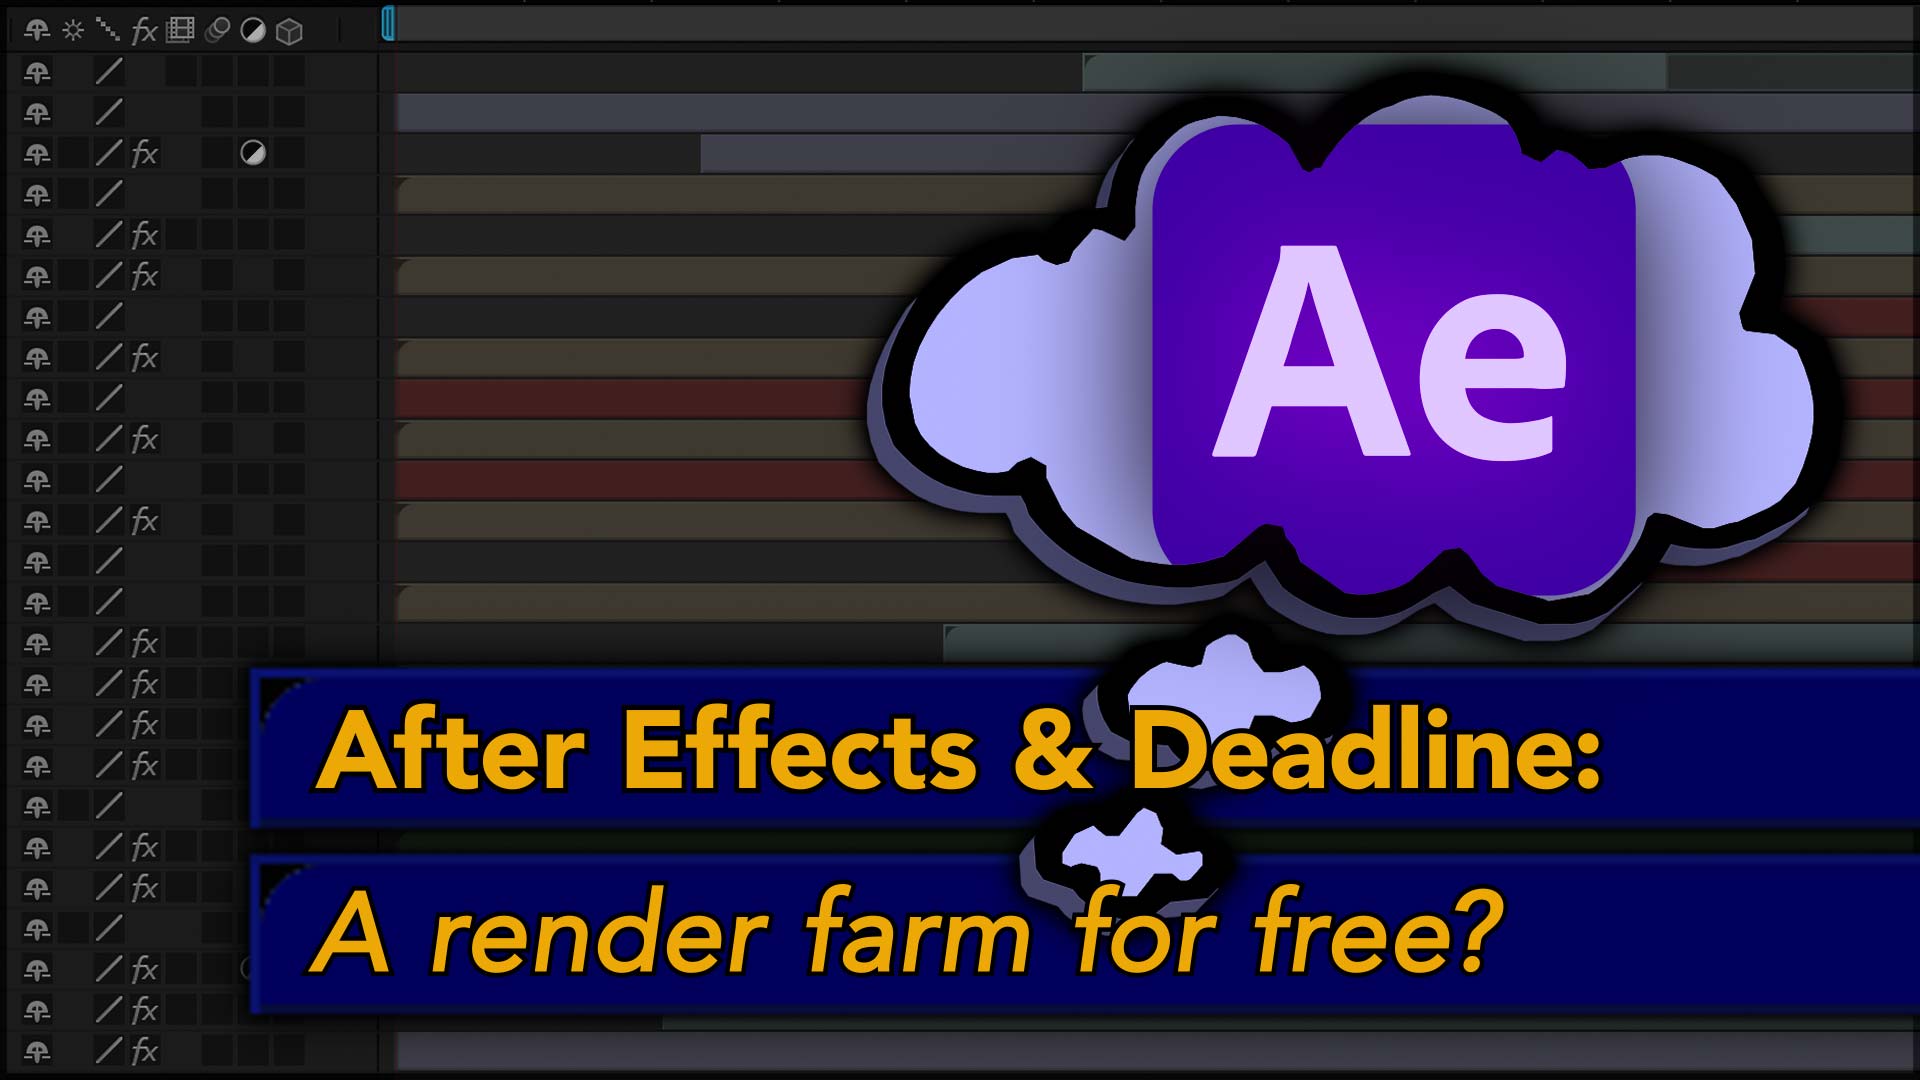 After Effects: Using Deadline for a Render Farm 2